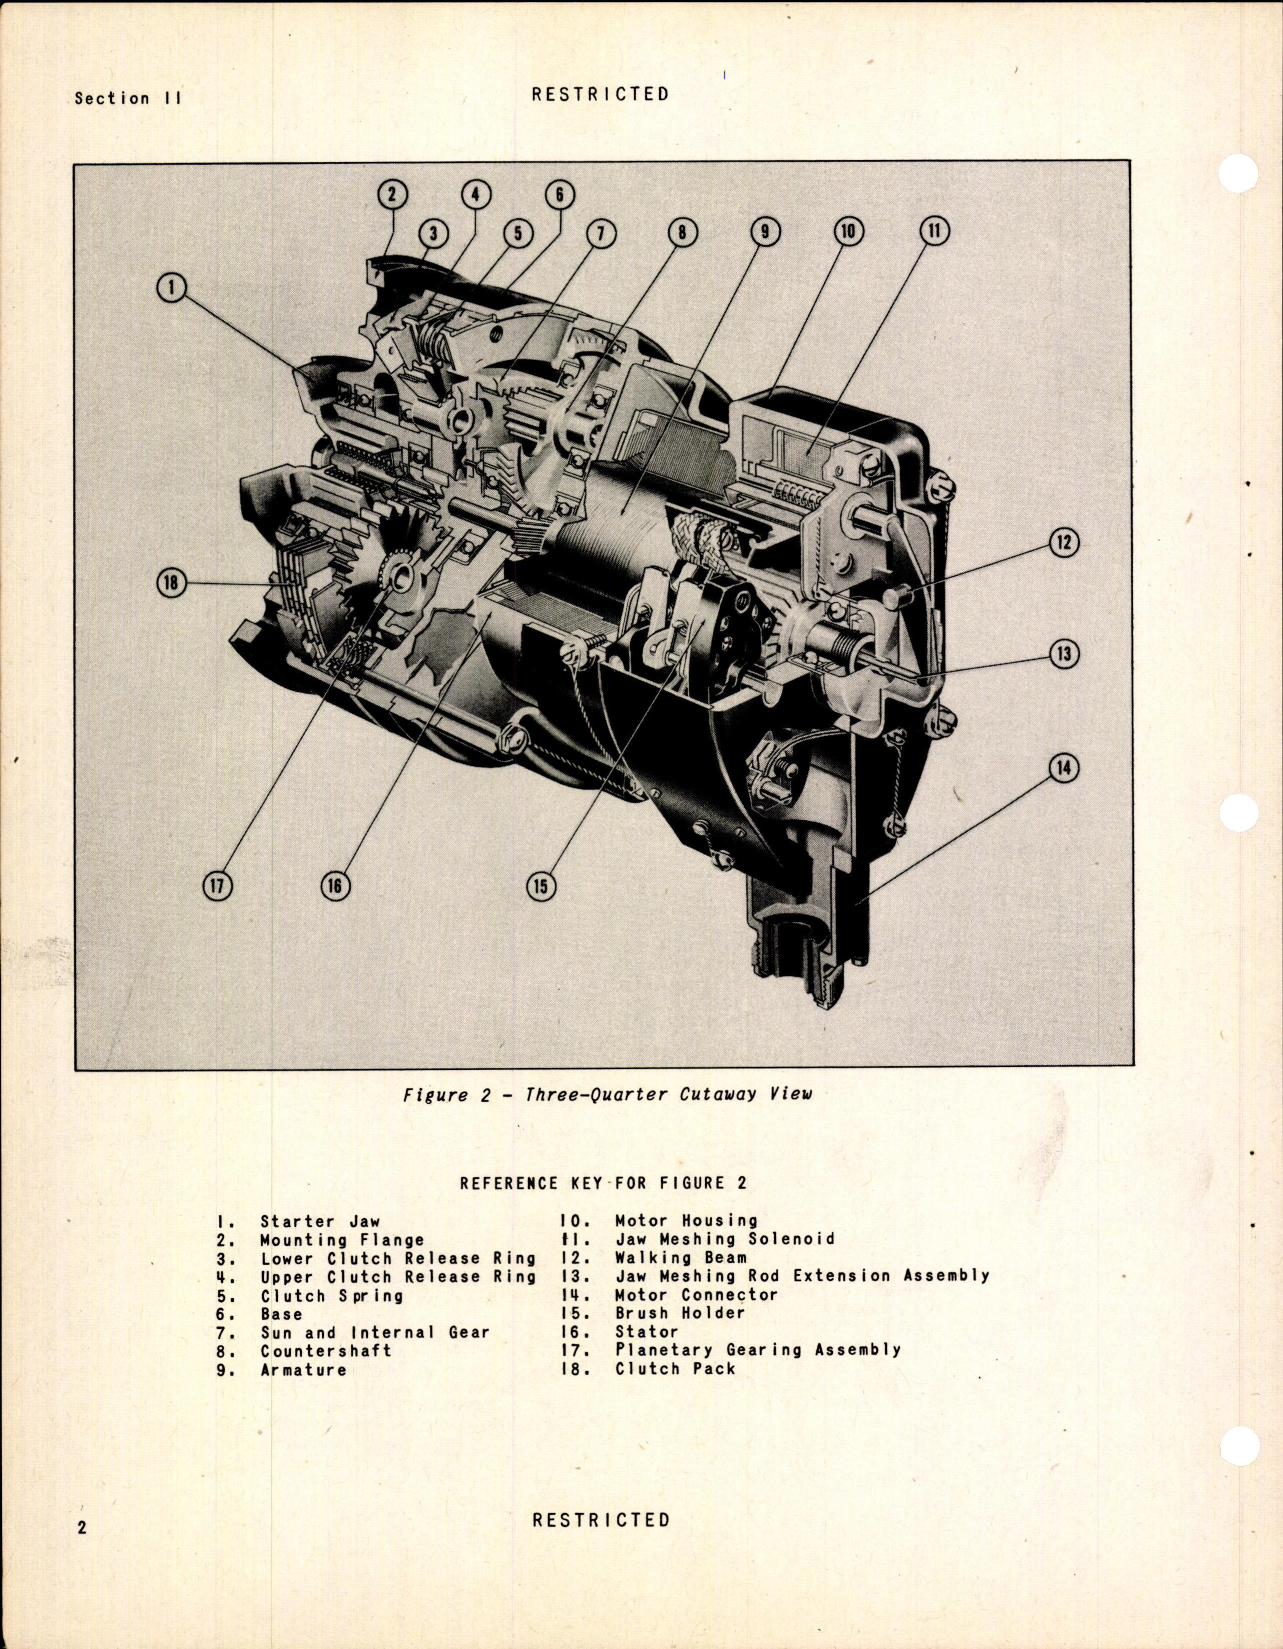 Sample page 8 from AirCorps Library document: Handbook of Instructions with Parts Catalog for Jahco Electric Starters Models JH4NE, JH4NF, and JH4NP Series